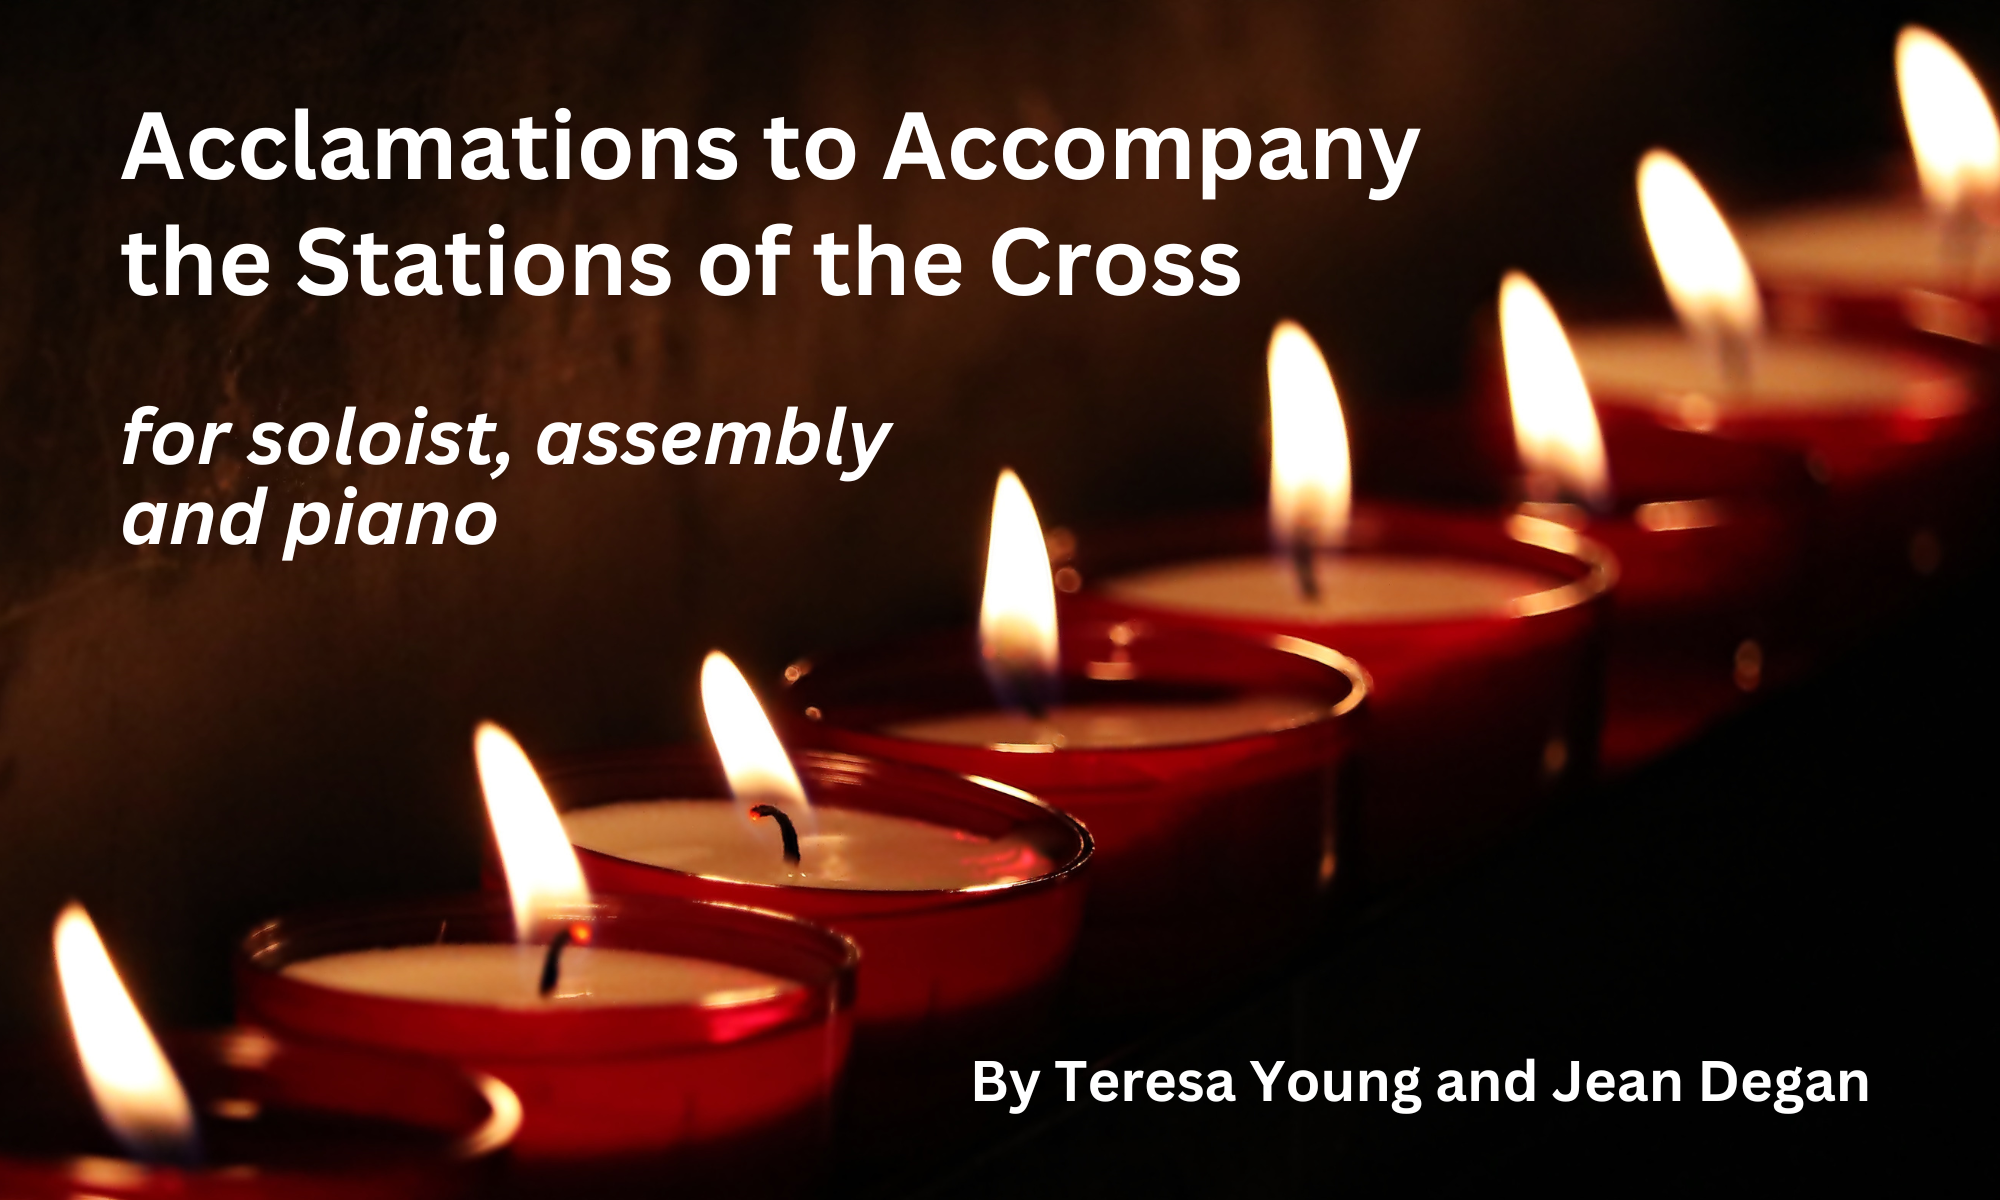 Acclamations to Accompany the Stations of the Cross, by Teresa Young and Jean Degan